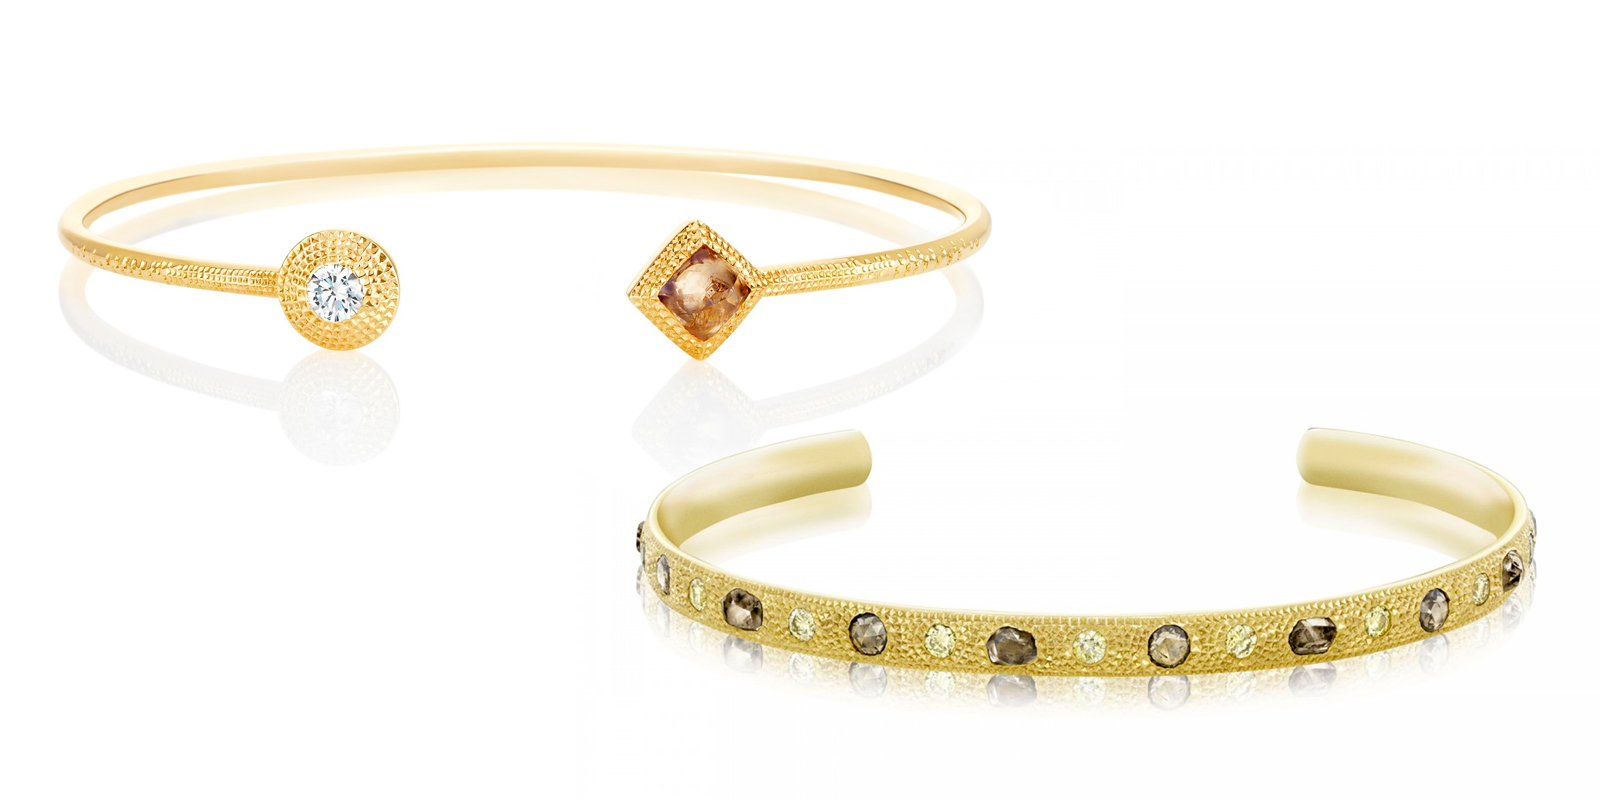 De Beers Talisman collection open bangles in yellow gold with rough and faceted diamonds